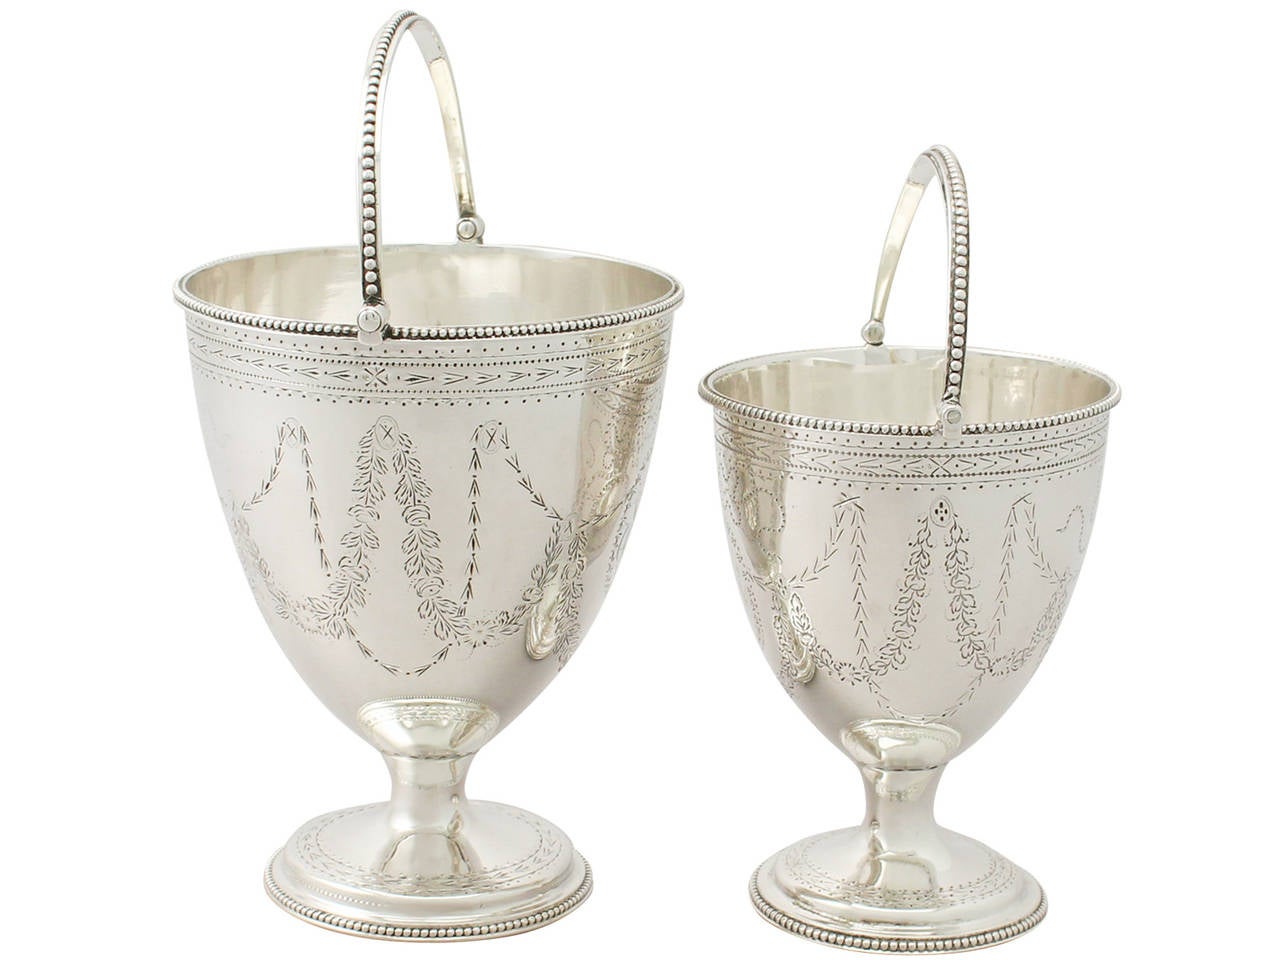 An exceptional, fine and impressive, graduating pair of antique Georgian English sterling silver sugar baskets; an addition to our presentation silverware collection.

These exceptional antique George III English sterling silver swing handled